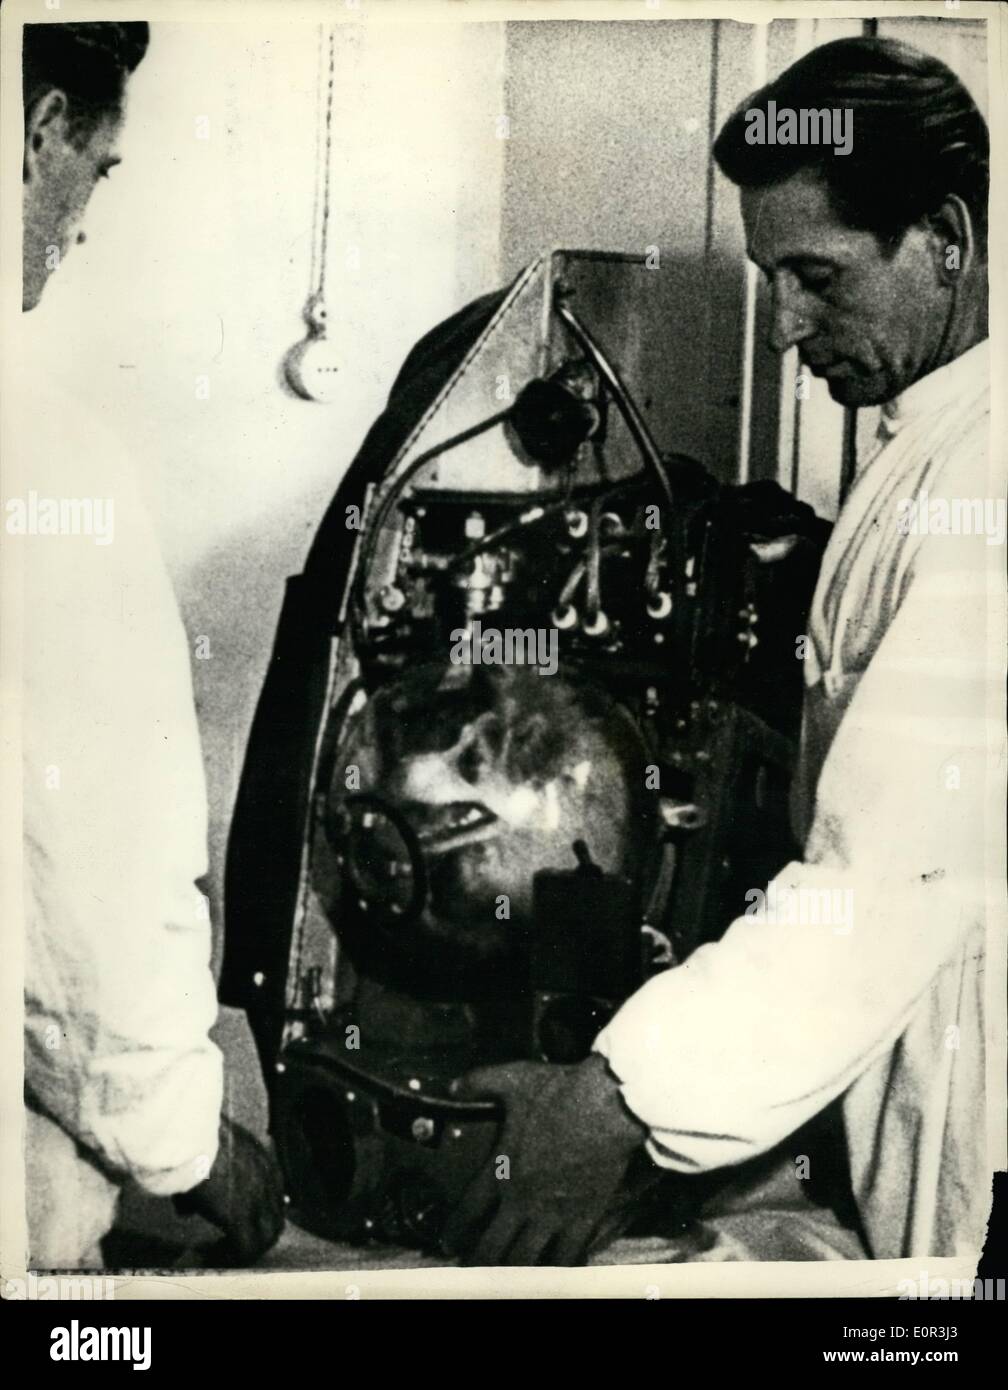 Nov. 11, 1957 - The Russian Satellite Dog Still Races Around The Orbit.. Experts Believe That It Cannot Be Returned To Earth. Experts believe that the dog now travelling around the orbit in the ''Sputnik II'' - Russia's latest Satellite - will die in space.. The ''Red Moon'' is cruising around the globe at 18,000 miles an hour - at between 200 and 500 miles above the earth.. The dog has been used in a number of space experiments by the Russian scientists. Stock Photo